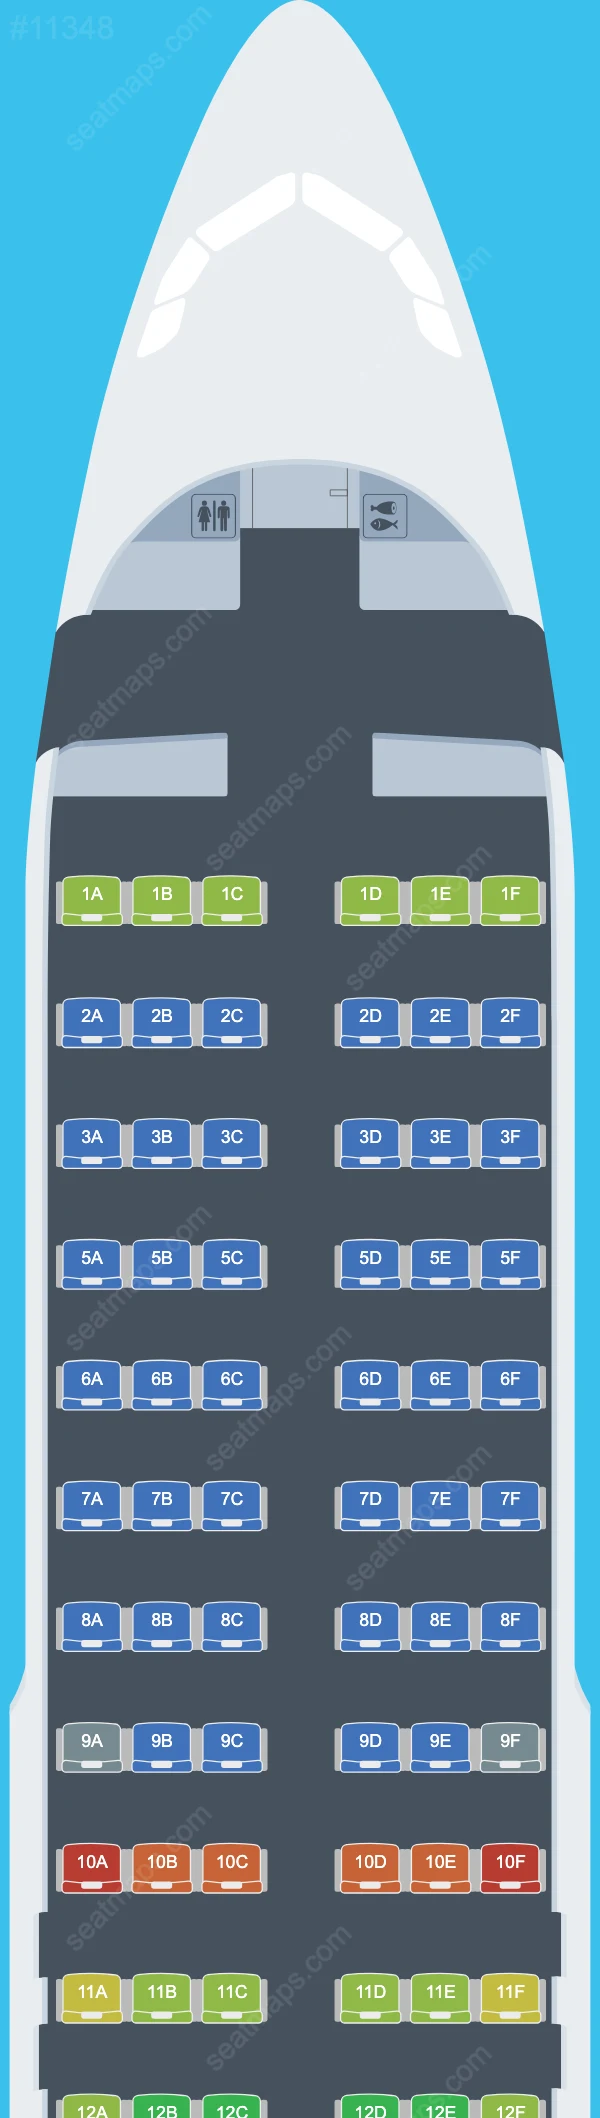 StarFlyer Airbus A320 Seat Maps A320-200neo